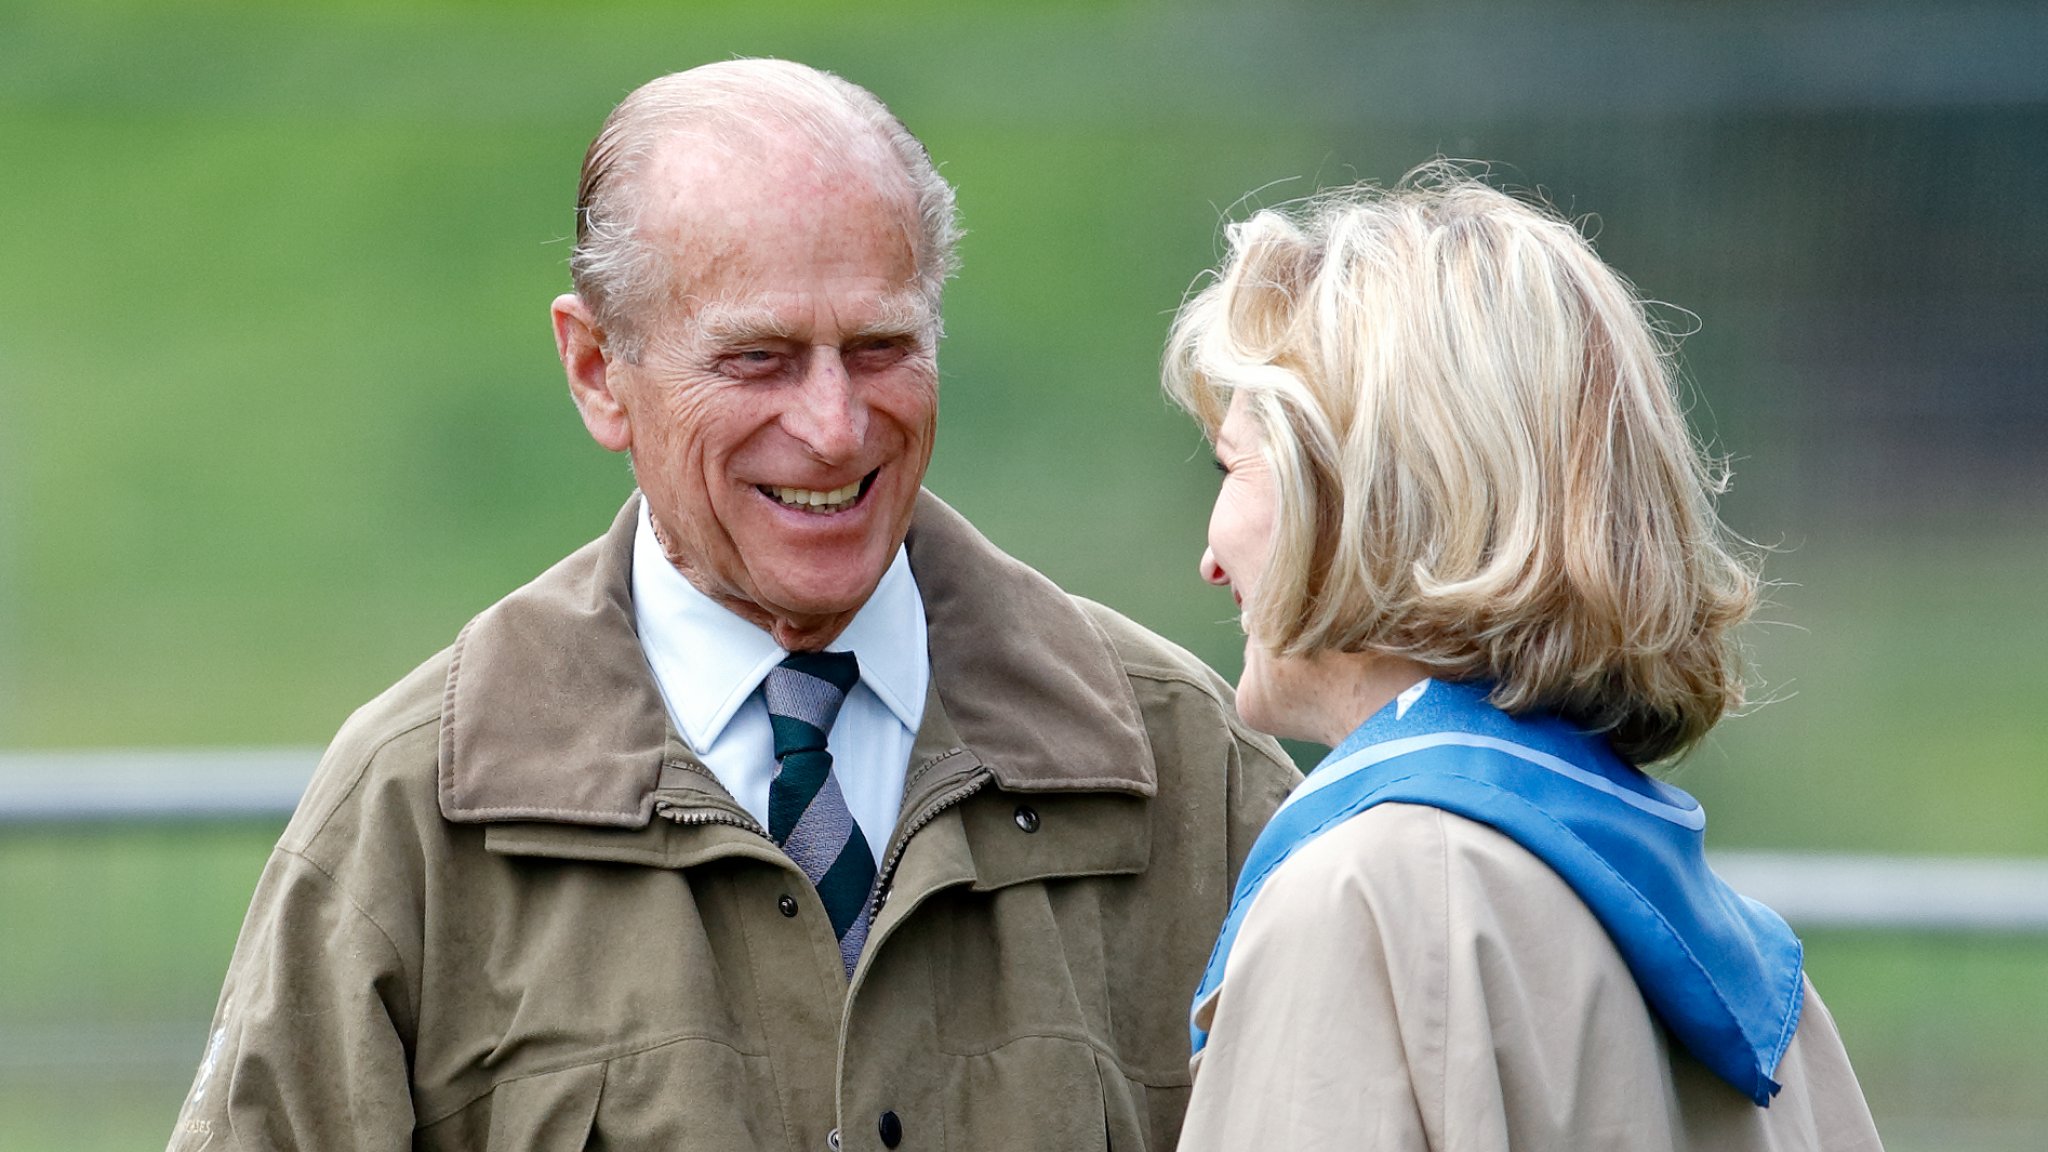 Details of Prince Philip's relationship embarrassing members of the royal family in The Crown